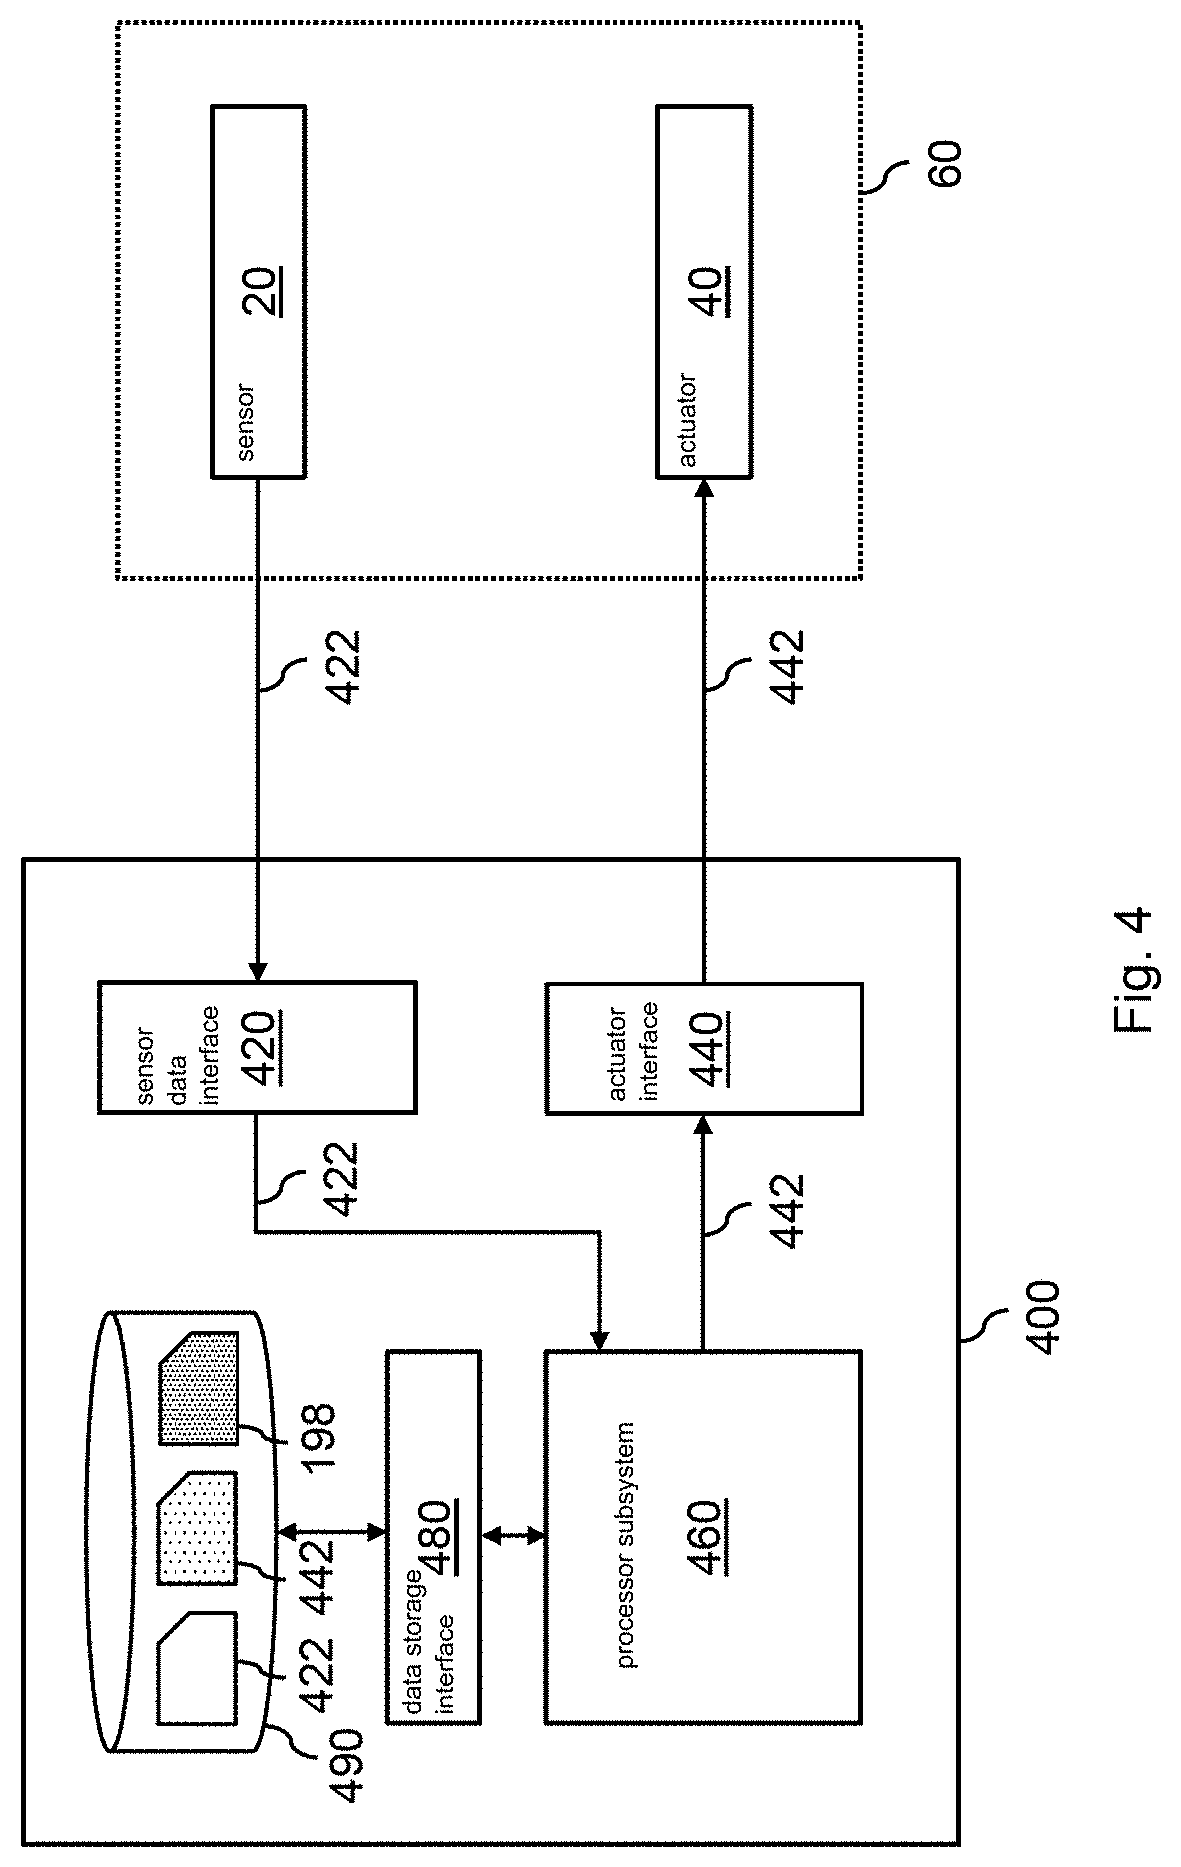 Training and data synthesis and probability inference using nonlinear conditional normalizing flow model